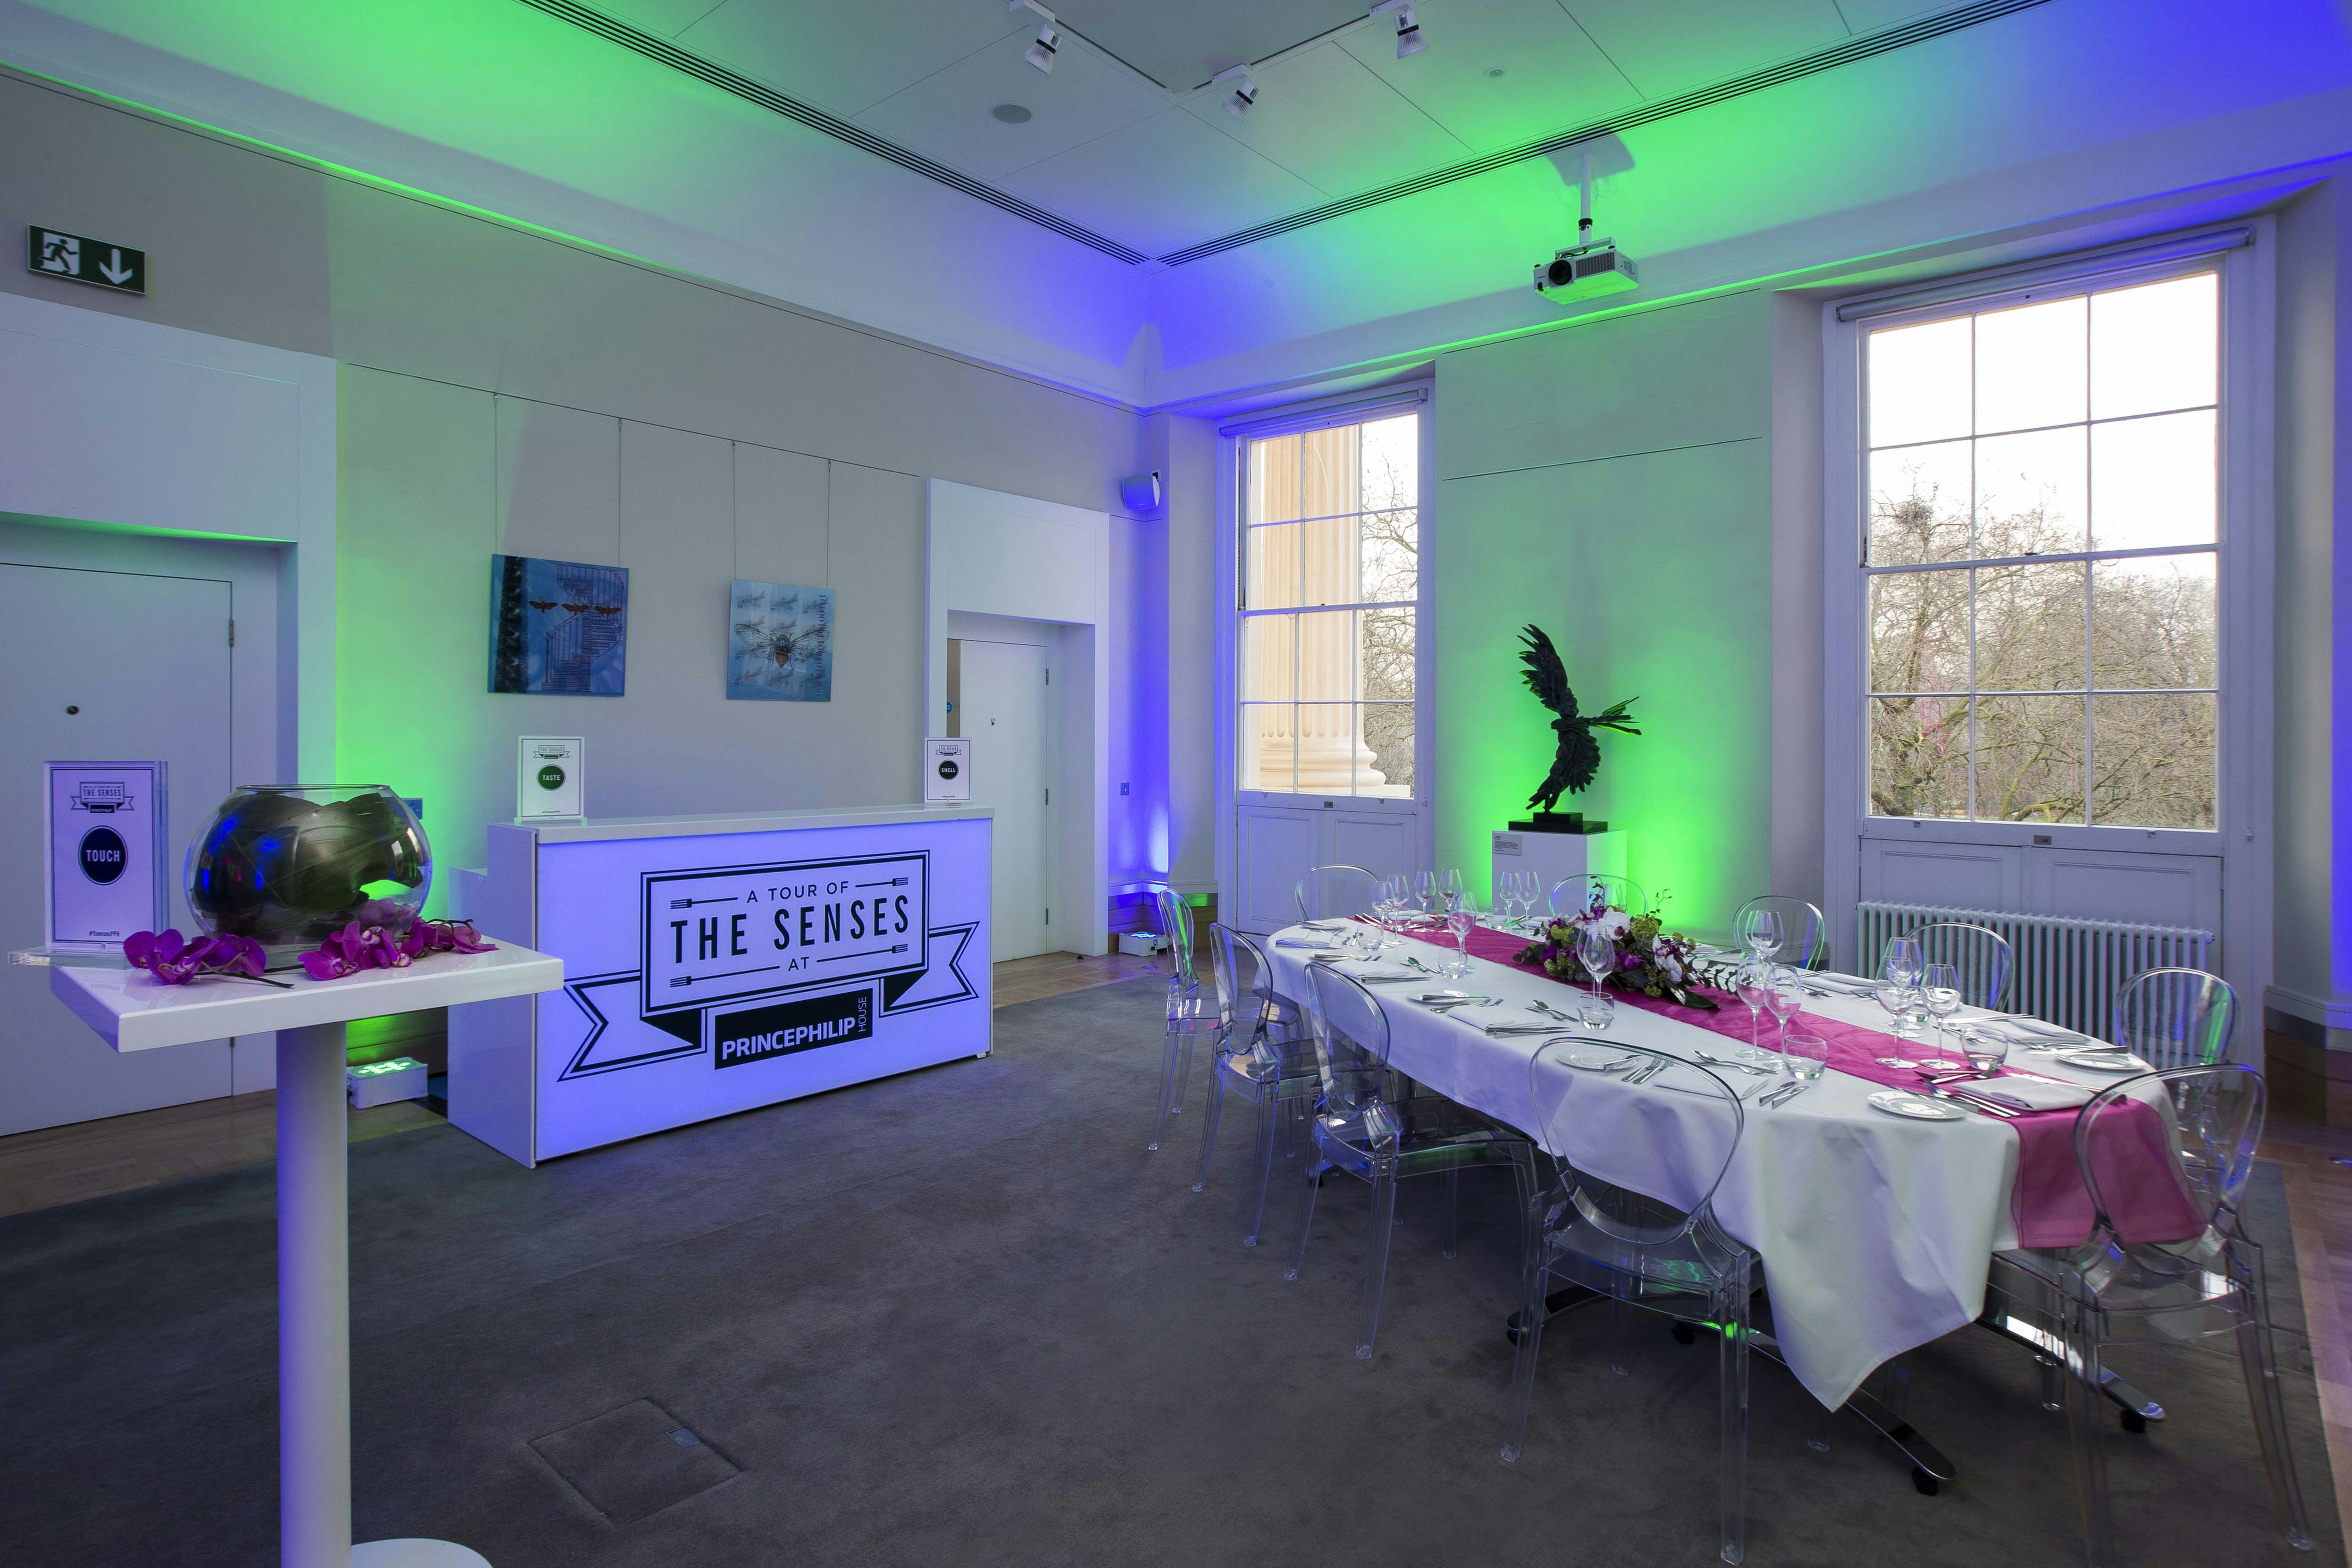 Warehouse Venues in London - Prince Philip House